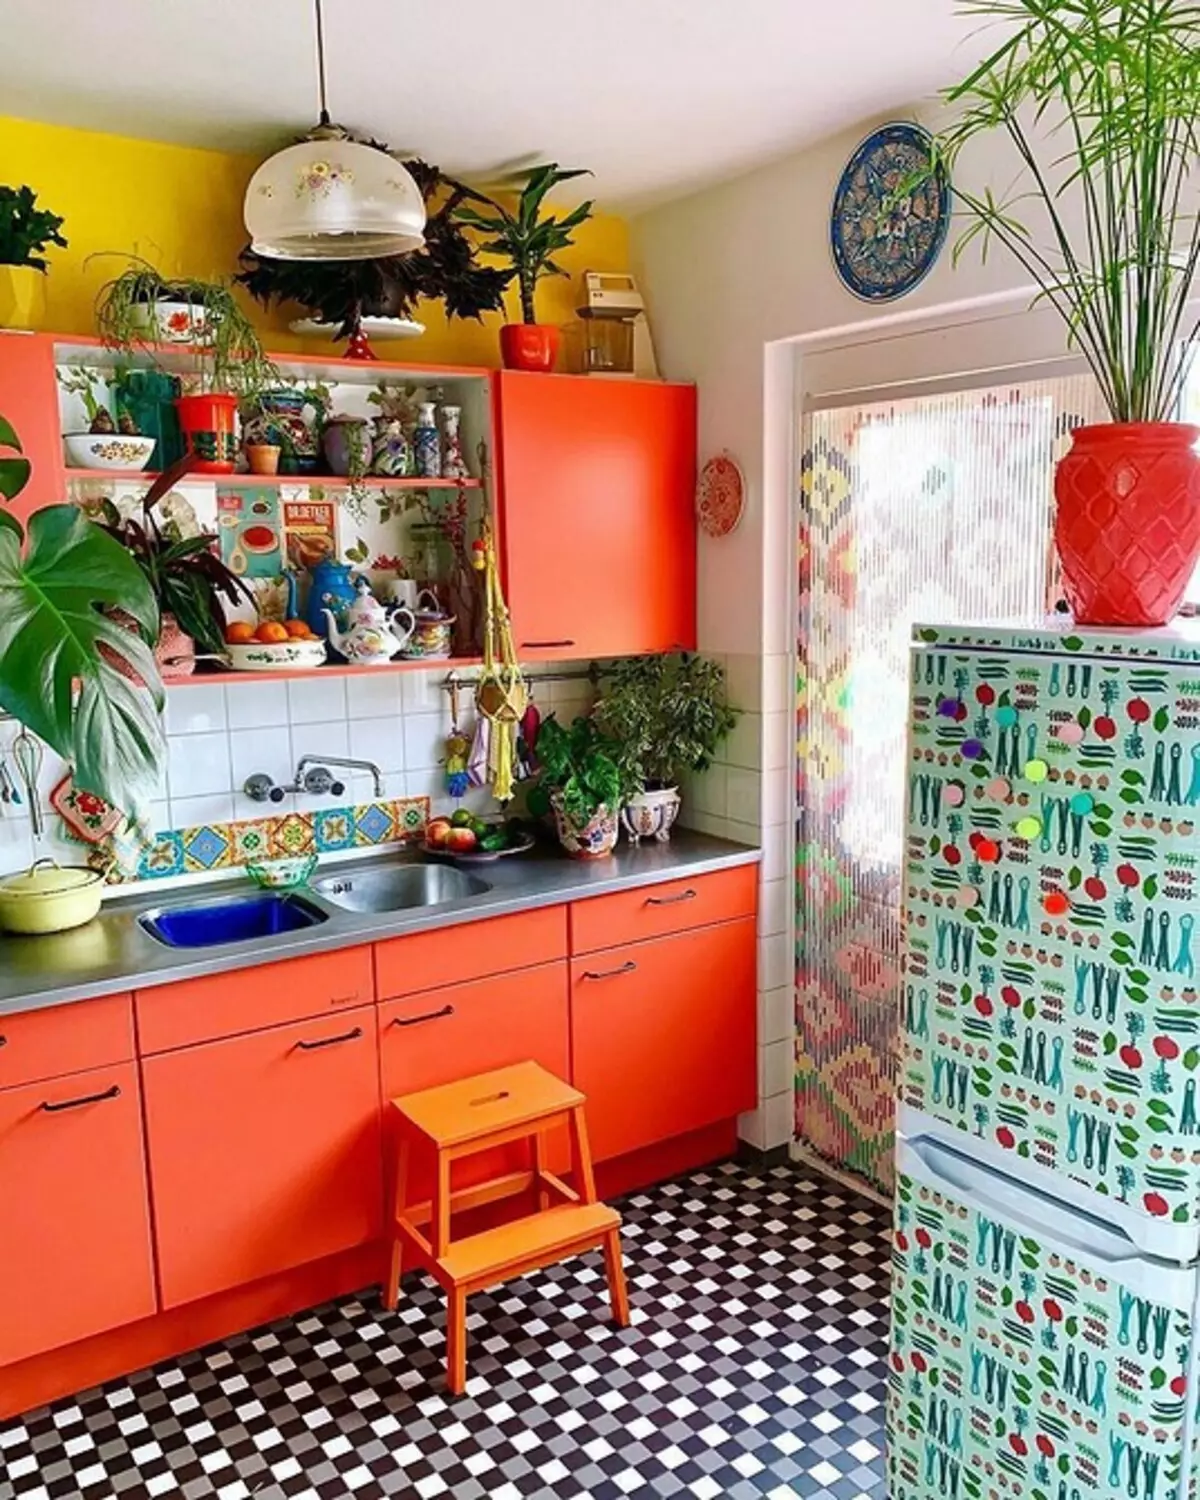 Orange kitchen in the interior: We disassemble the pros, cons and successful color combinations 8372_31